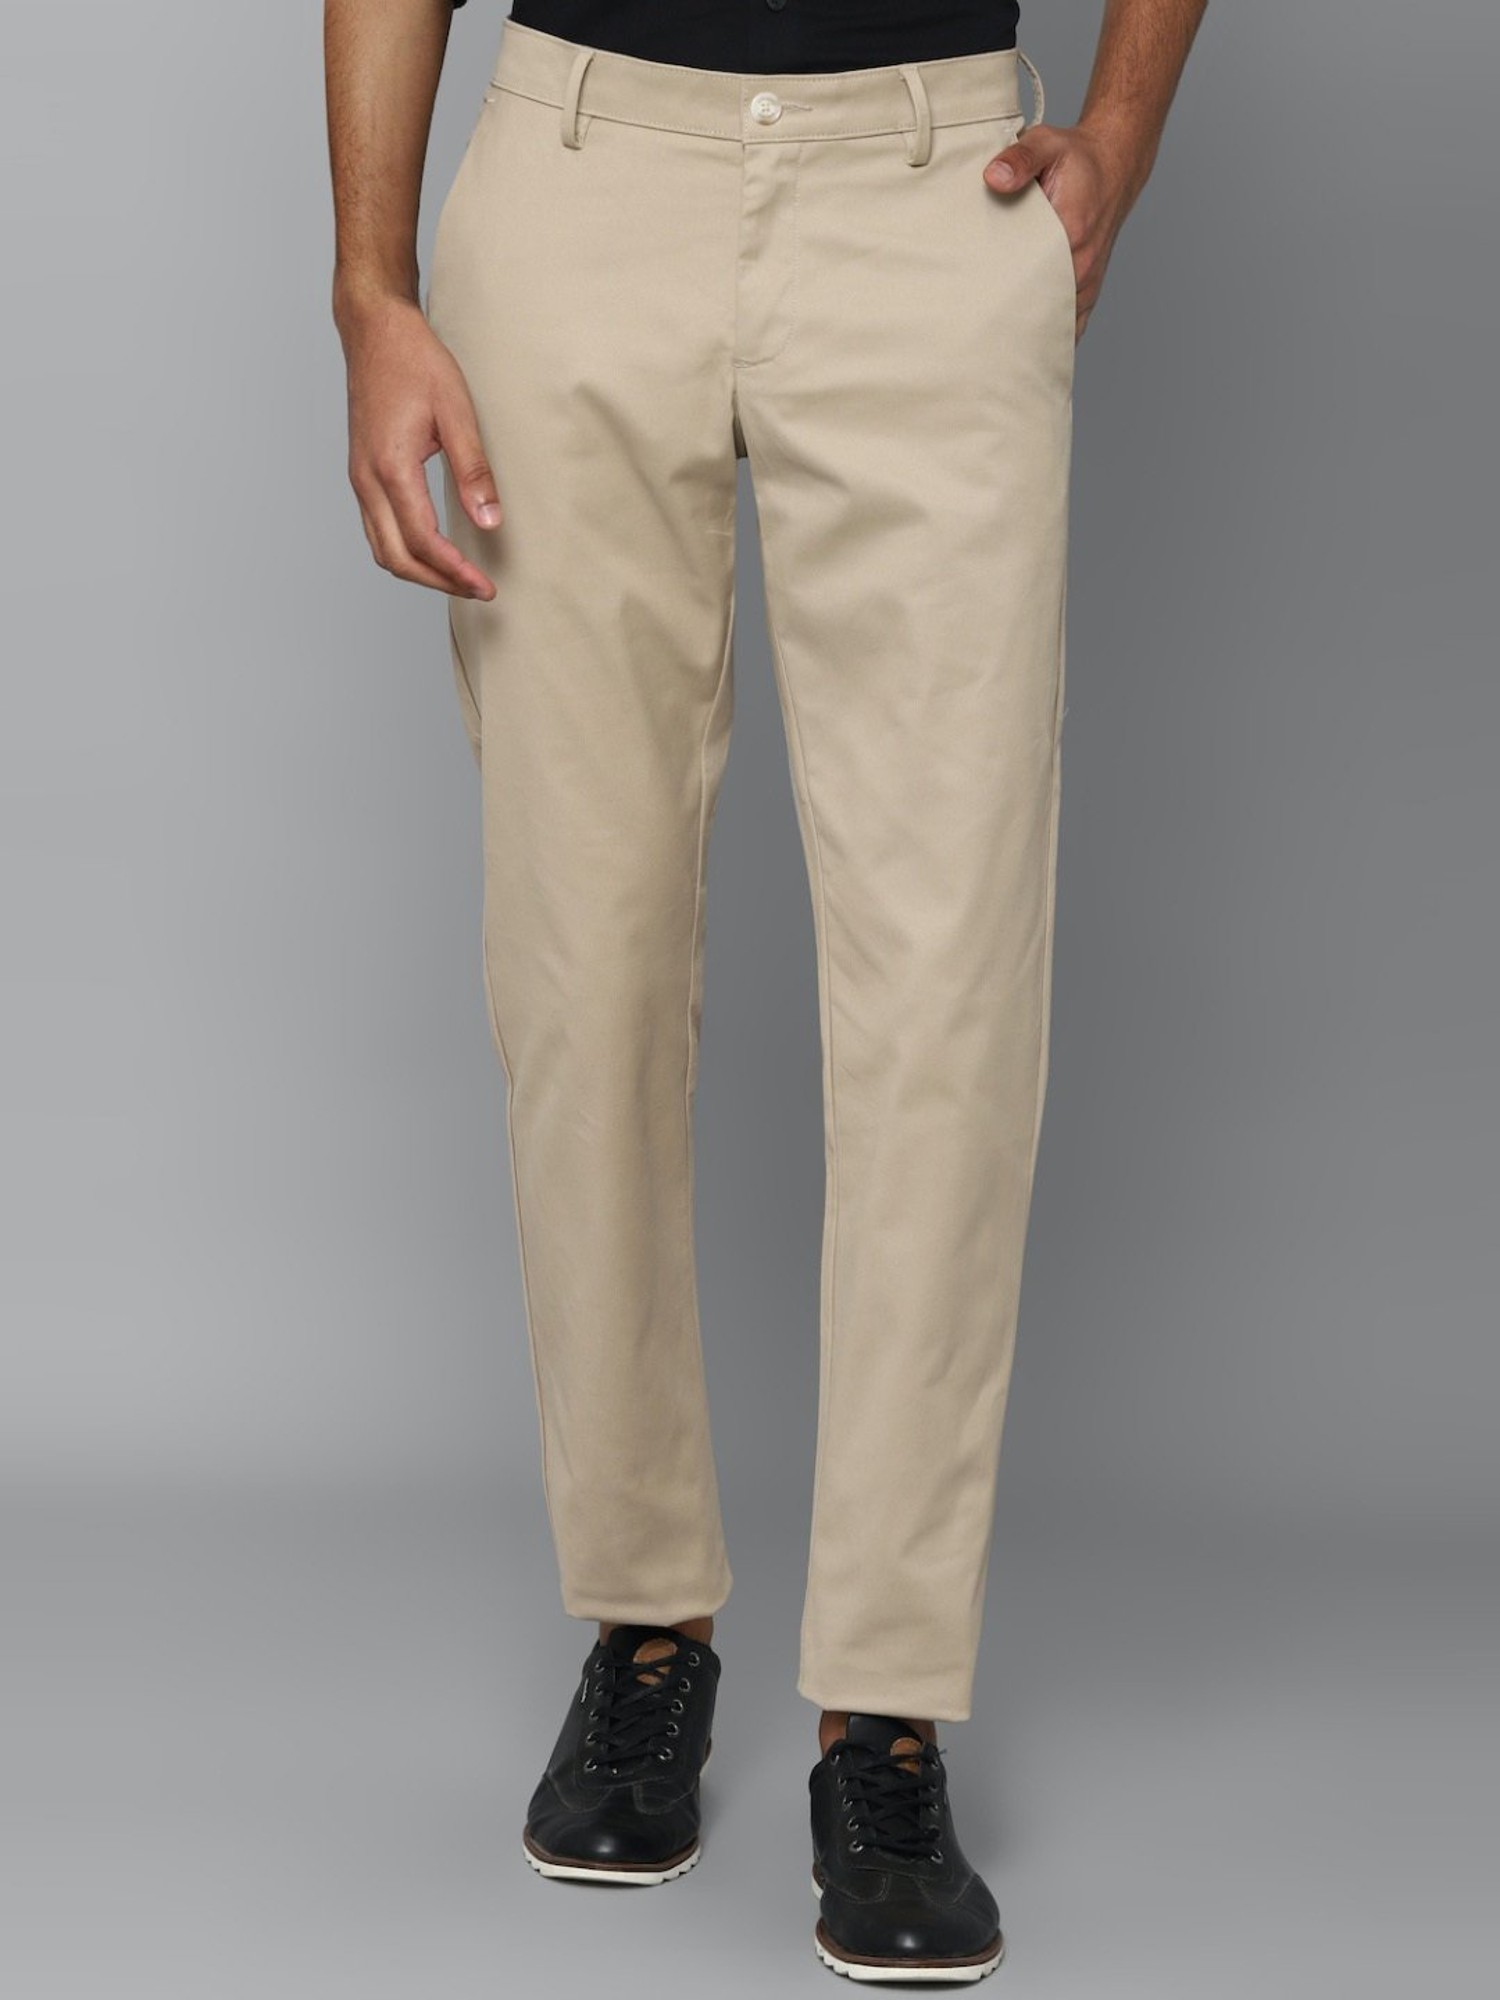 Allen Solly Men Cotton Solid Slim Fit Trousers - Price History